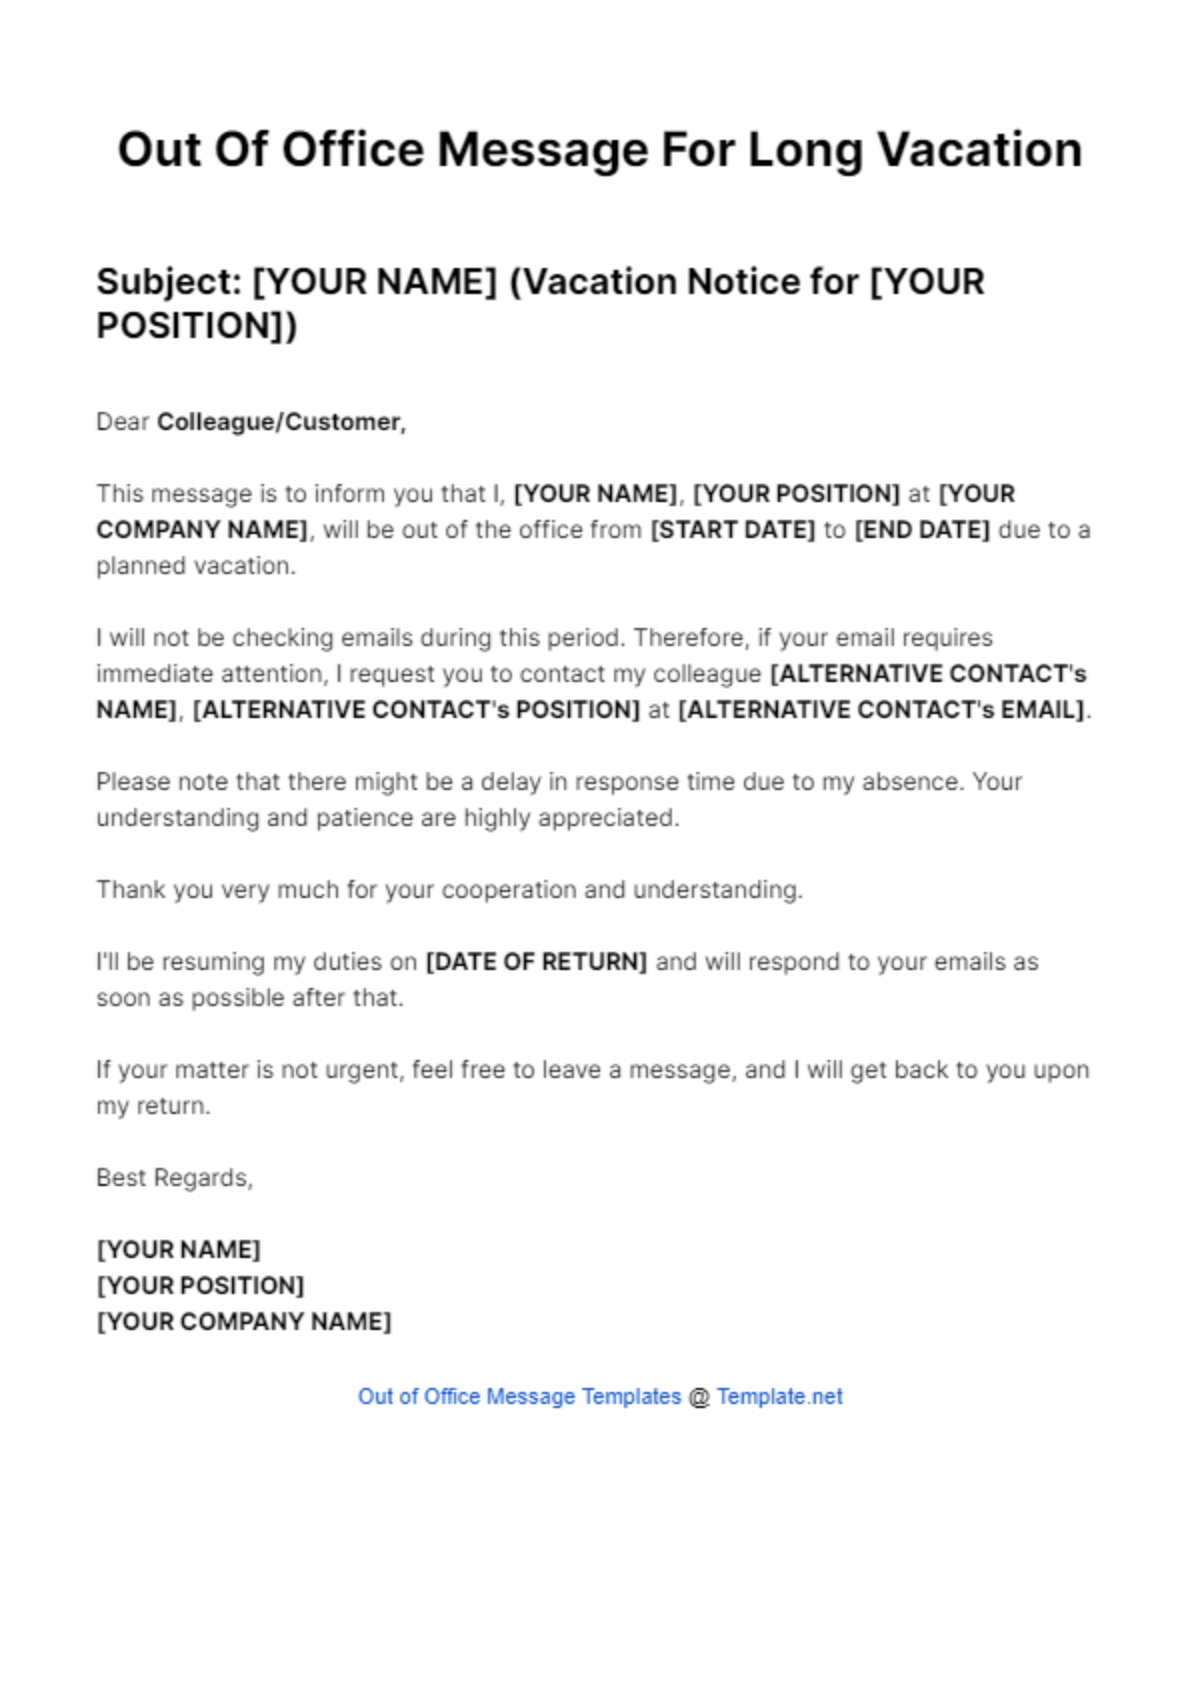 Out Of Office Message For Long Vacation Template